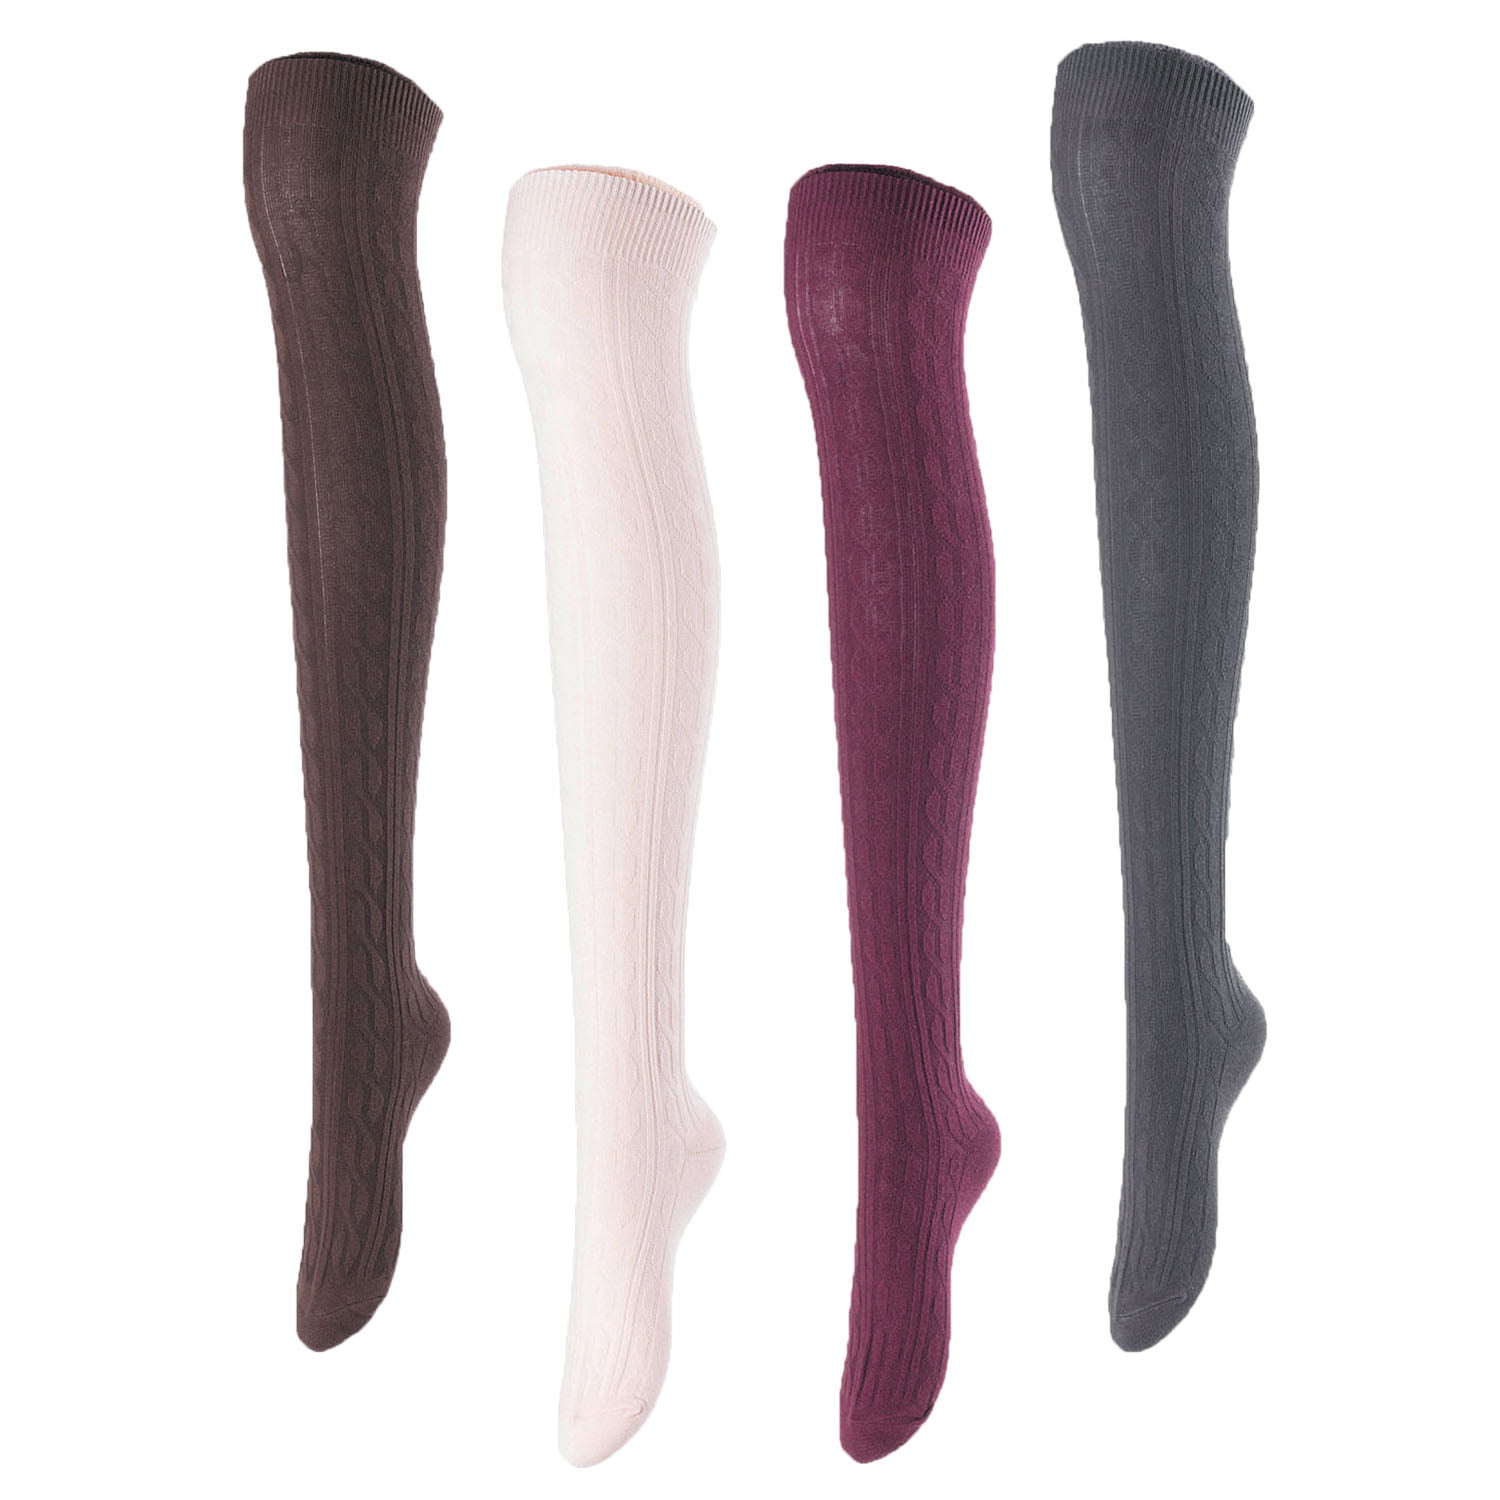 AATMart Womens 4 PAIRS HIGH KNEE COTTON SOCKS FOR WOMEN COZY FLUFFY AND FANCY WITH A WIDE COLOR AND SIZE RANGE 